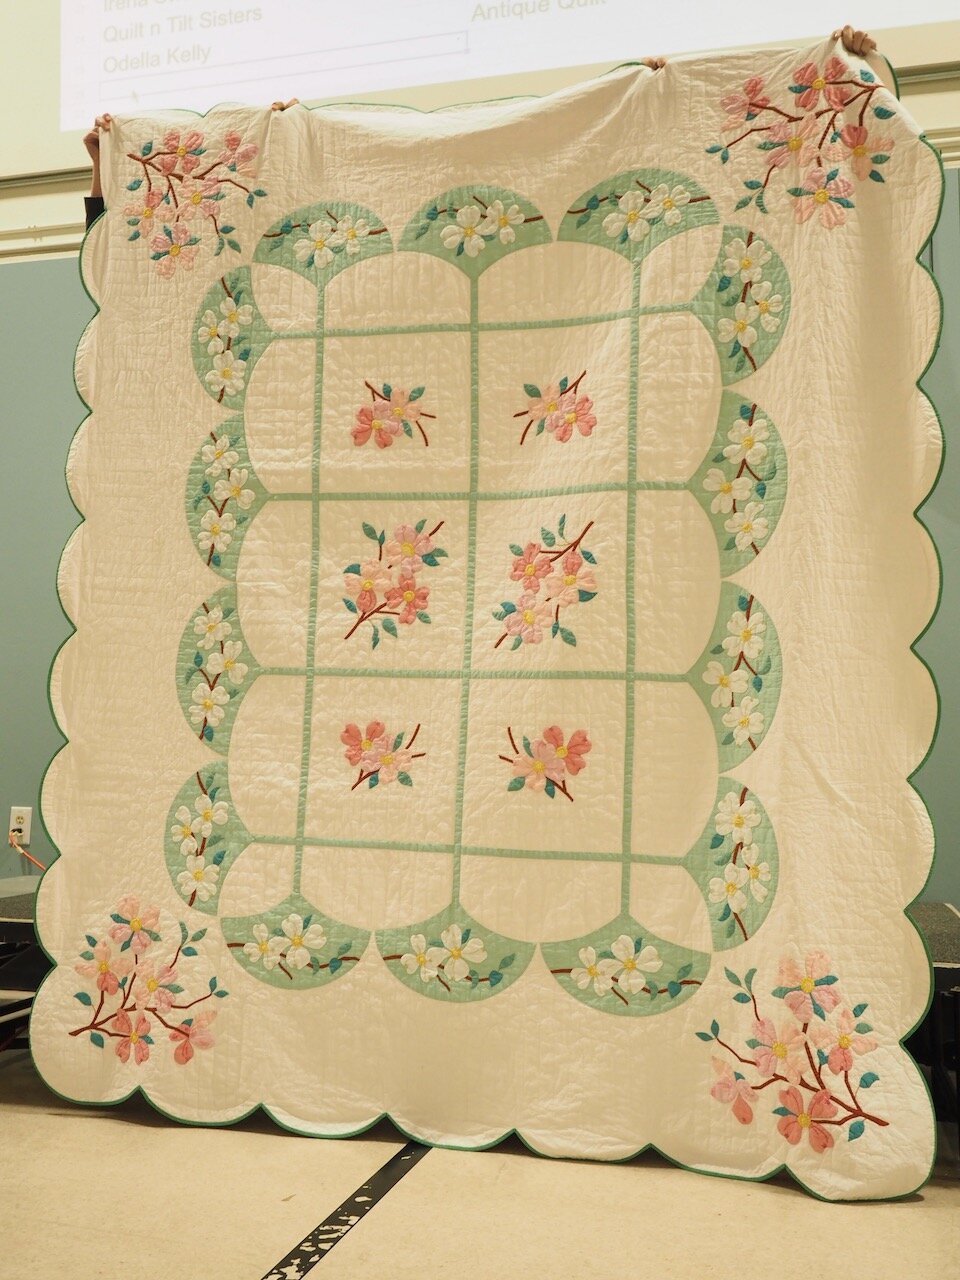 Antique Quilt by Odella Kelly